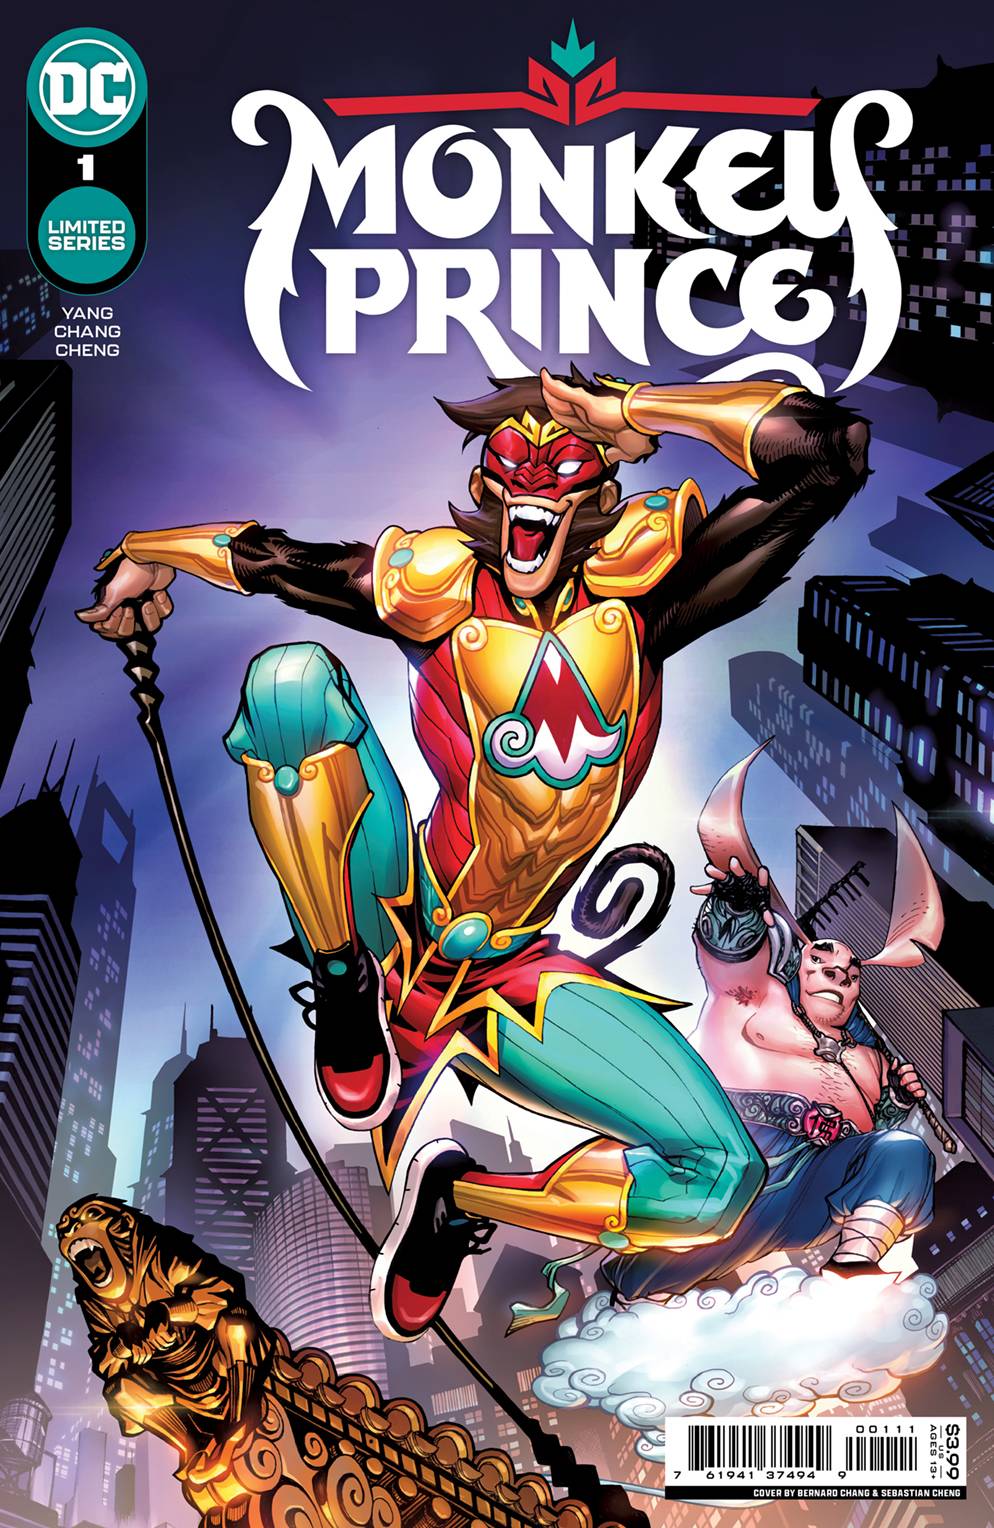 Monkey Prince #1 (of 12) Cover A